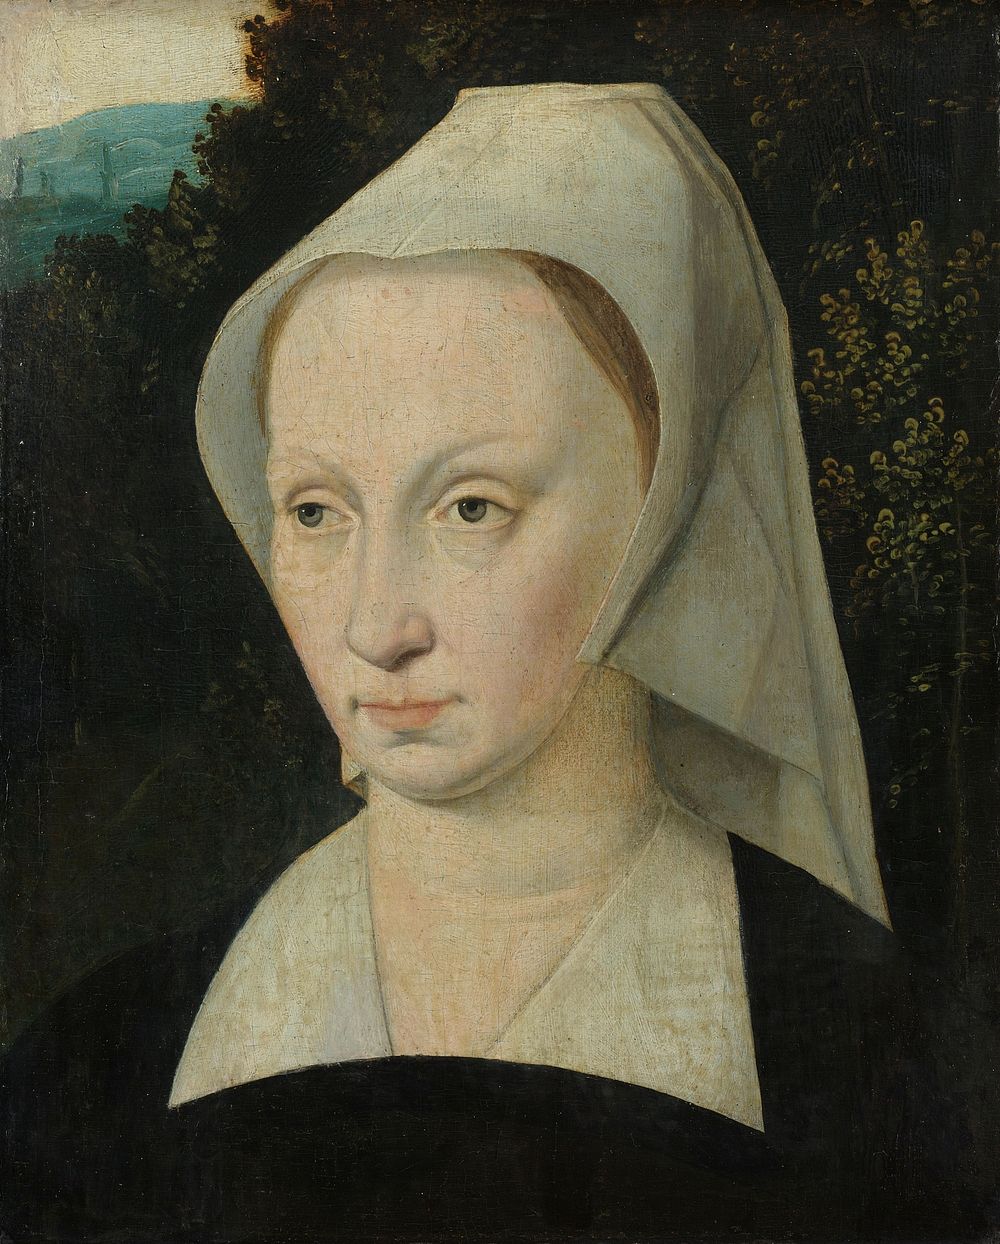 Portrait of a woman (c. 1540 - c. 1550) by anonymous